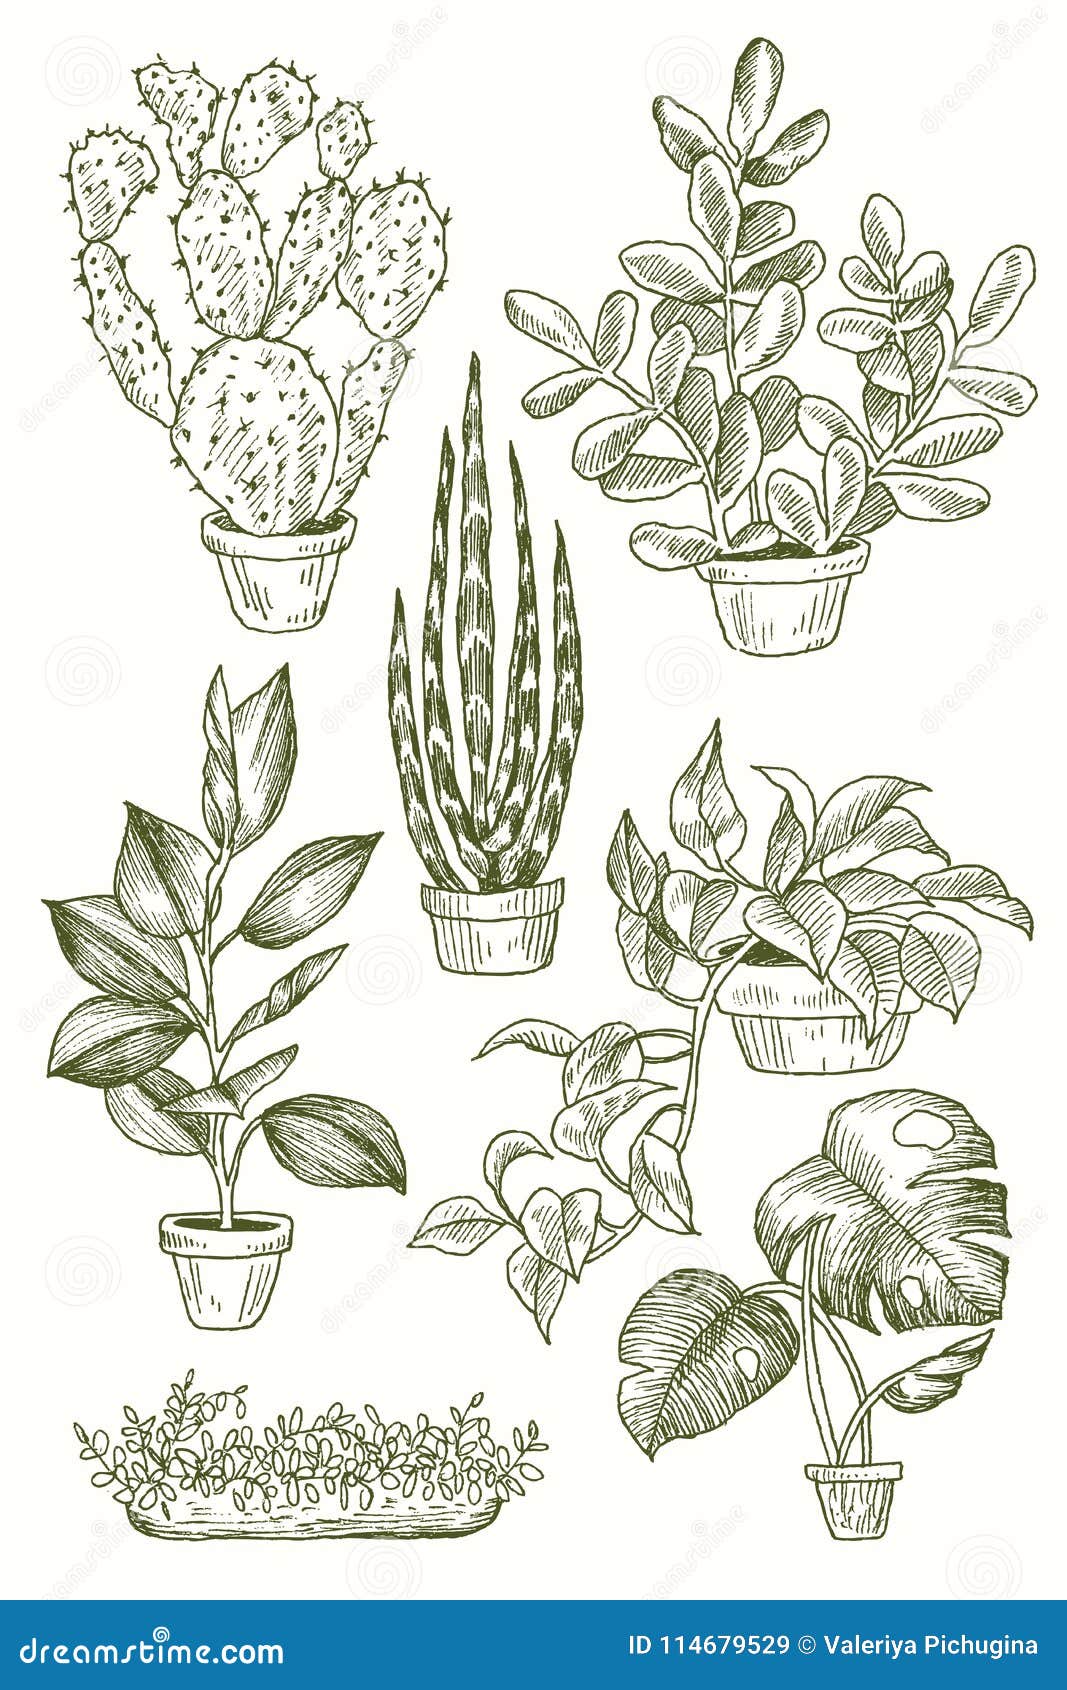 Illustration of Houseplants, Indoor and Office Plants in Pot. Set of